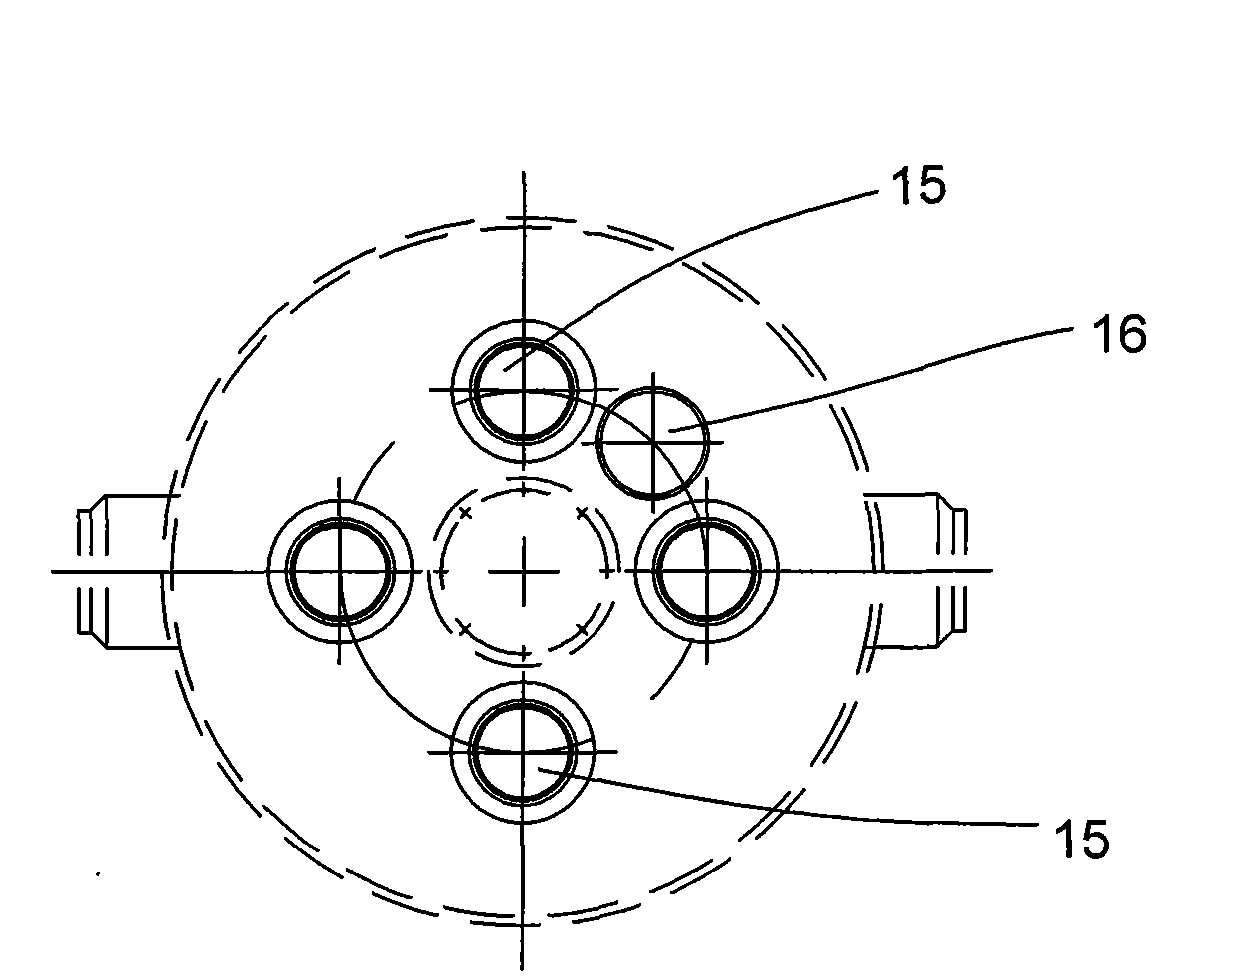 Heat exchange device for methanol synthesis reactor